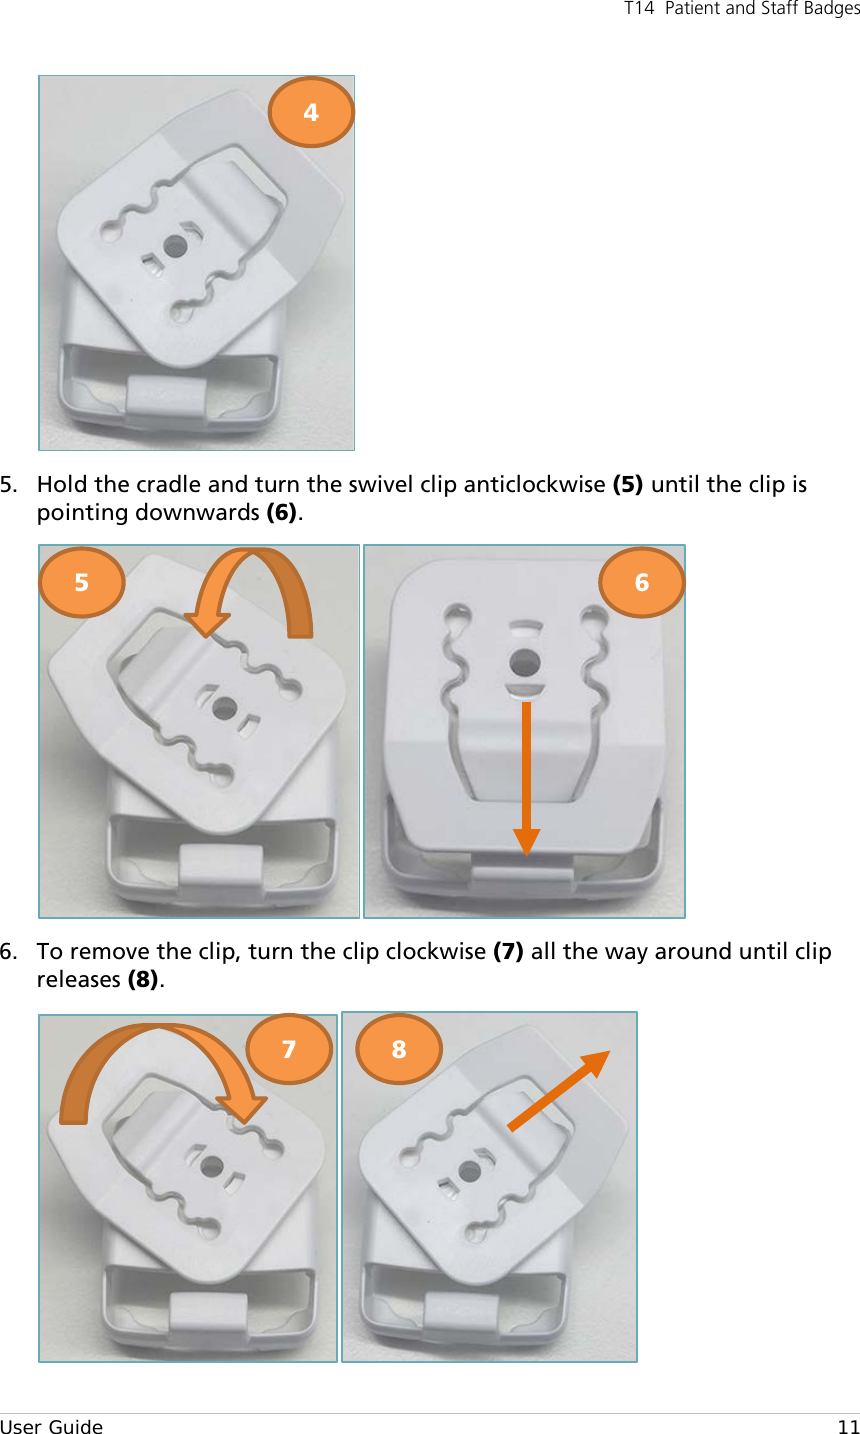 T14  Patient and Staff Badges  User Guide    11  5. Hold the cradle and turn the swivel clip anticlockwise (5) until the clip is pointing downwards (6).  6. To remove the clip, turn the clip clockwise (7) all the way around until clip releases (8).  4 5 6 7 8 